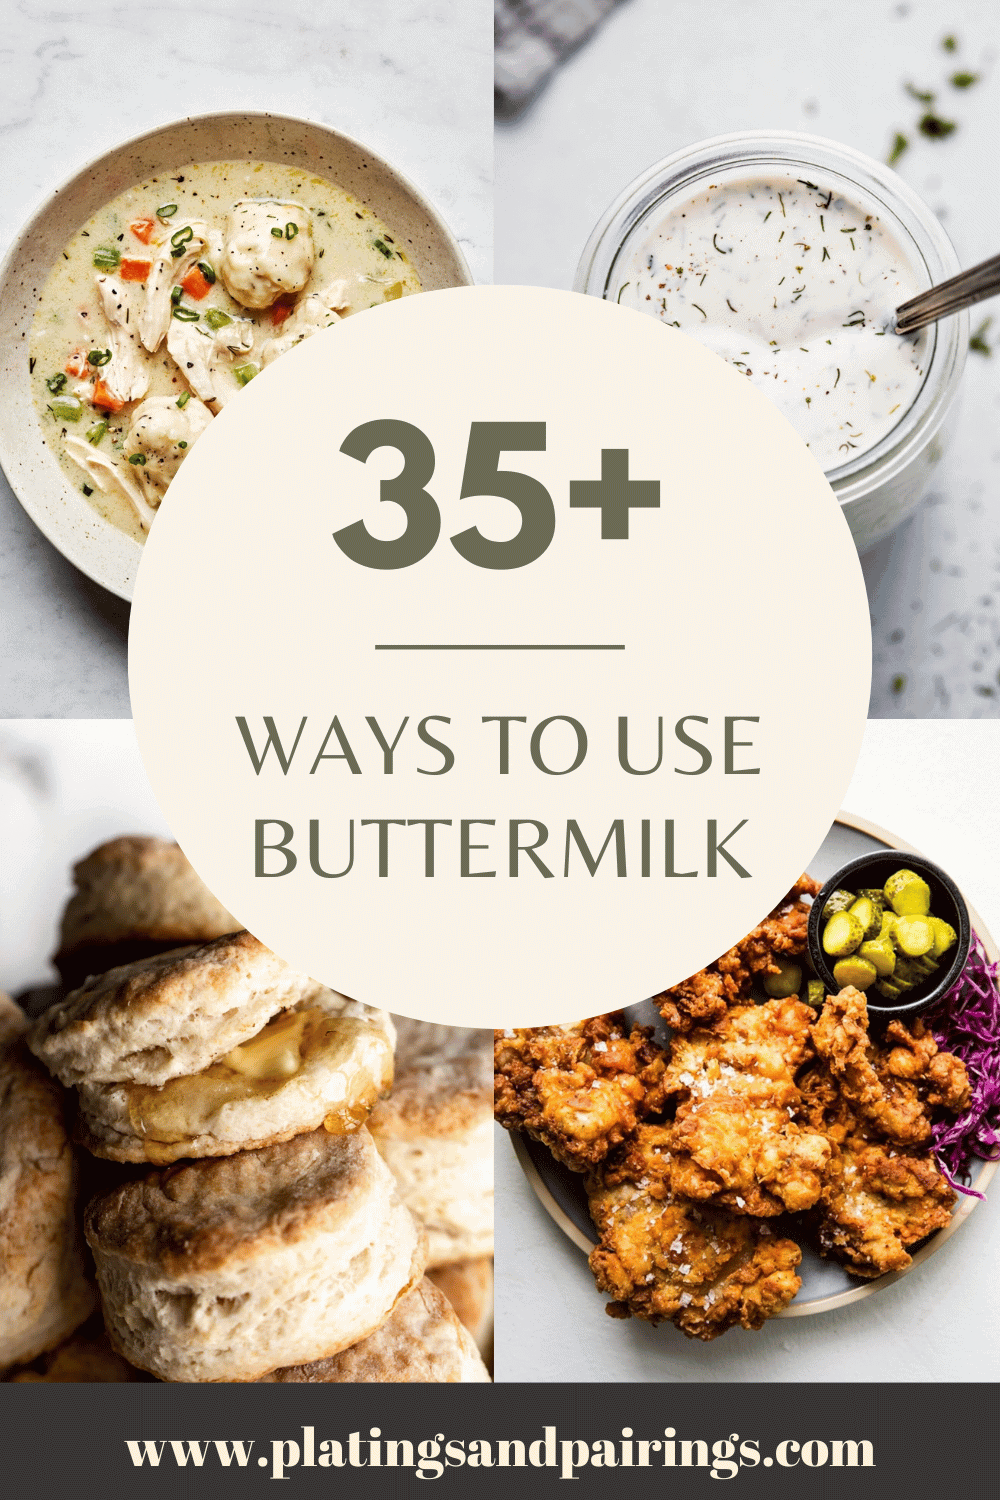 Collage of recipes that use buttermilk with text overlay.